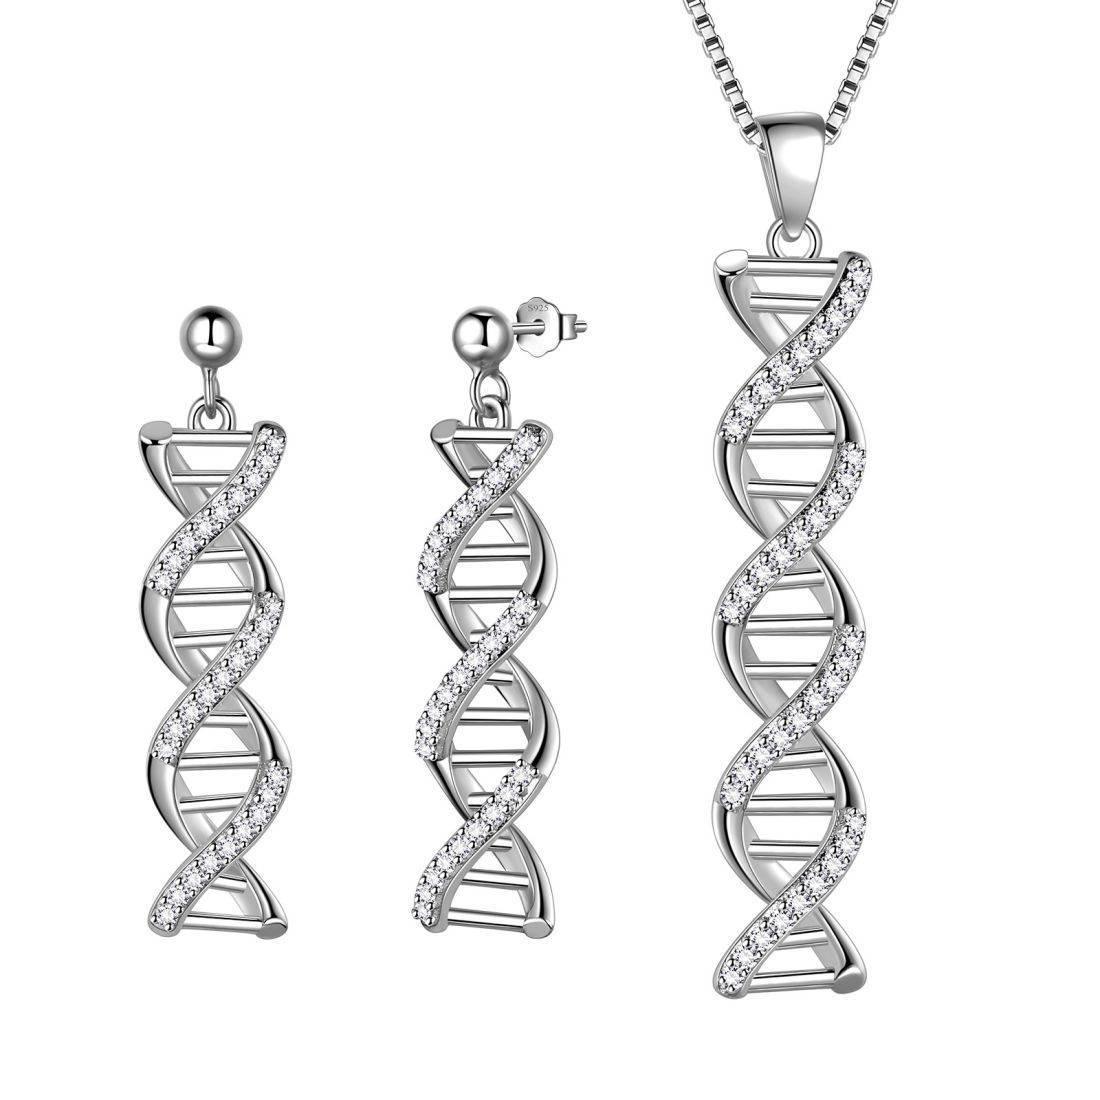 Infinity DNA Double Helix Jewelry Set Necklace Earrings Aurora Tears - Jewelry Set - Aurora Tears Jewelry